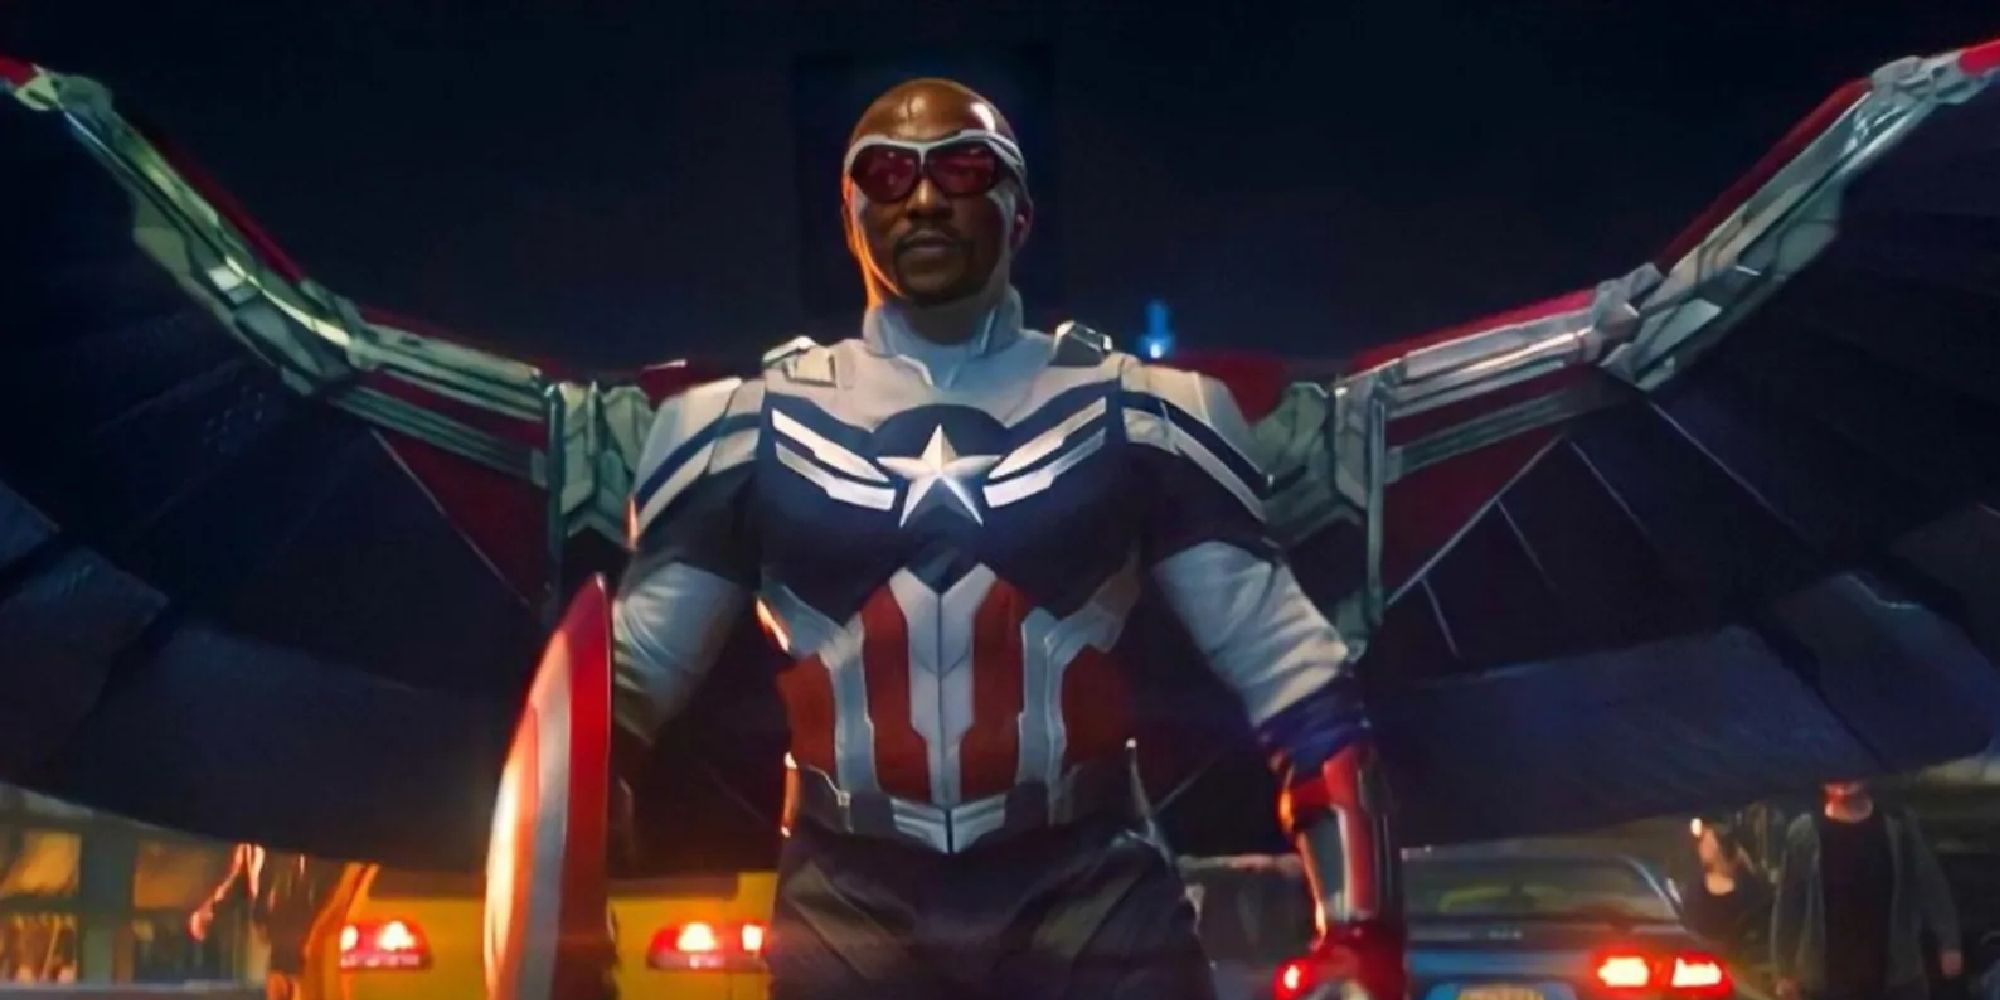 Sam Wilson donning his Captain America suit with wings and Steve's shield 